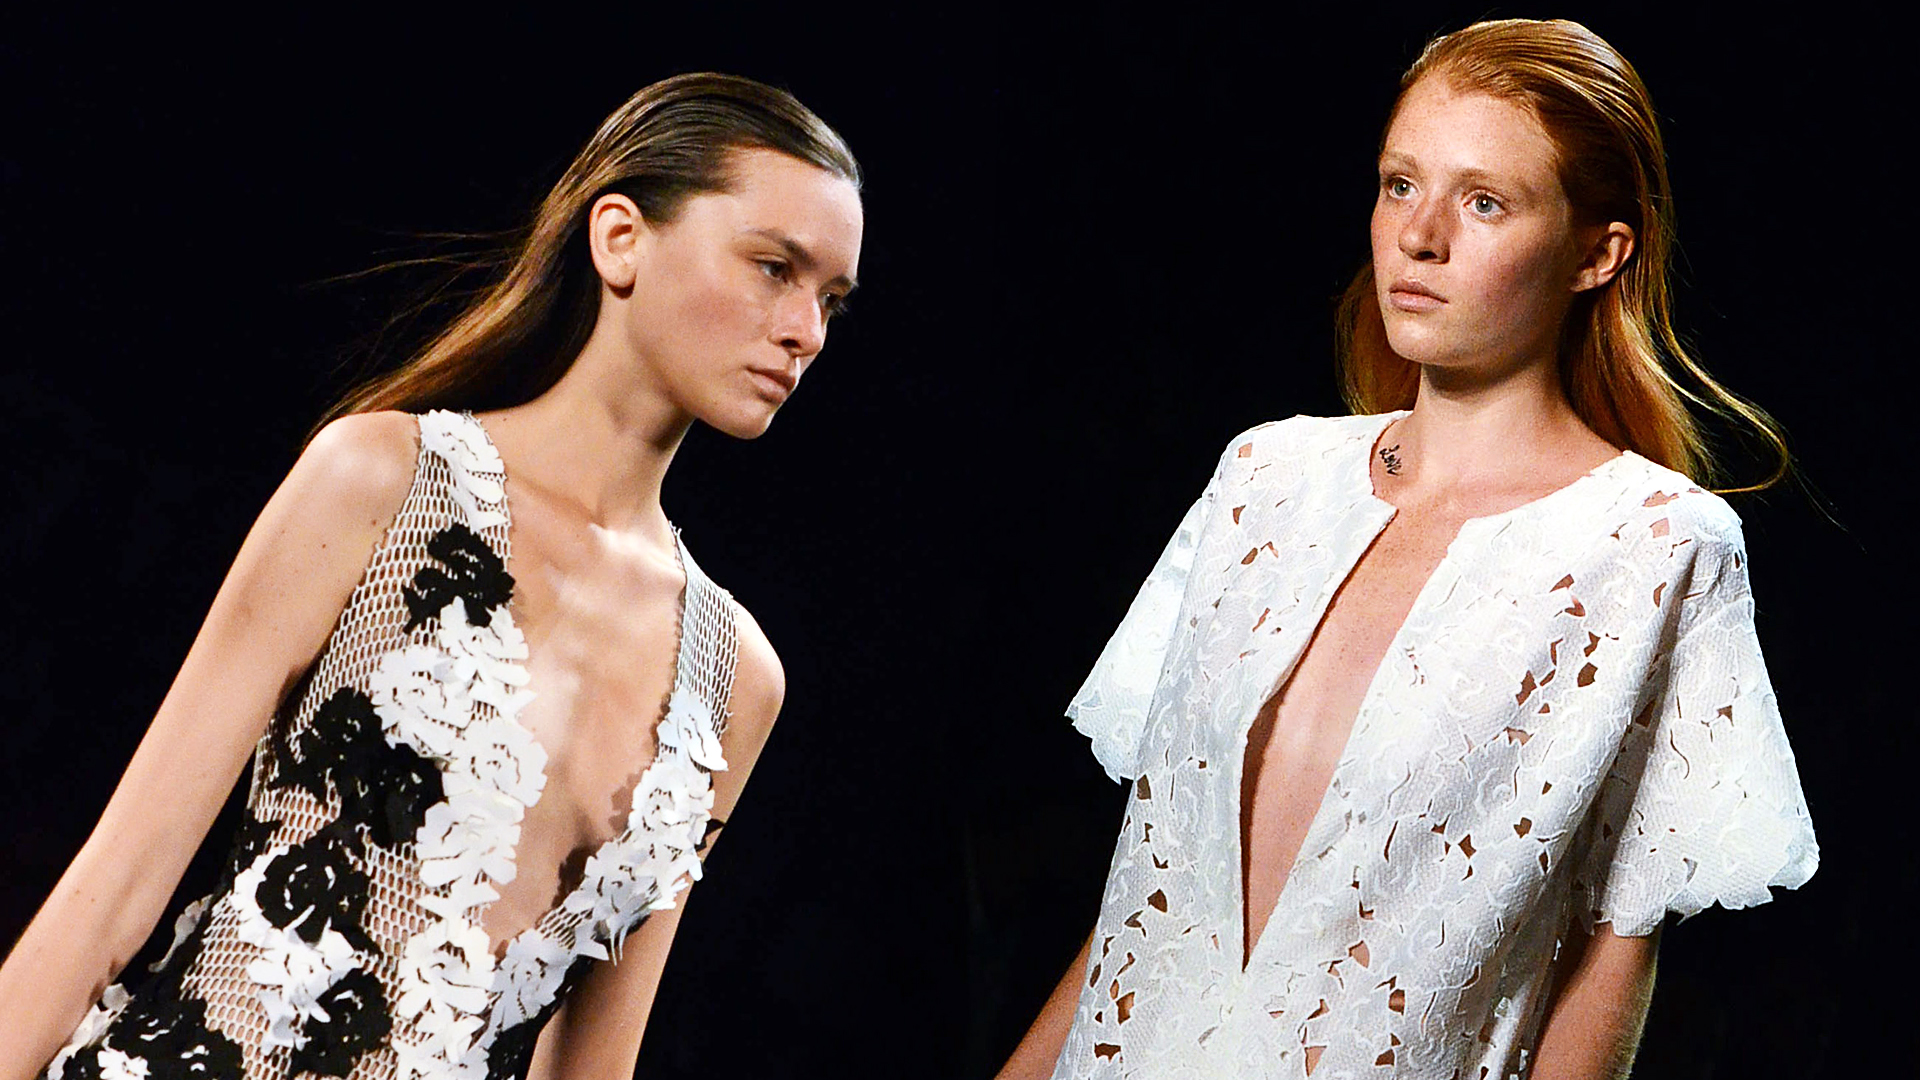 Creations from Vivienne Tam's spring/summer 2016 collection in New York.